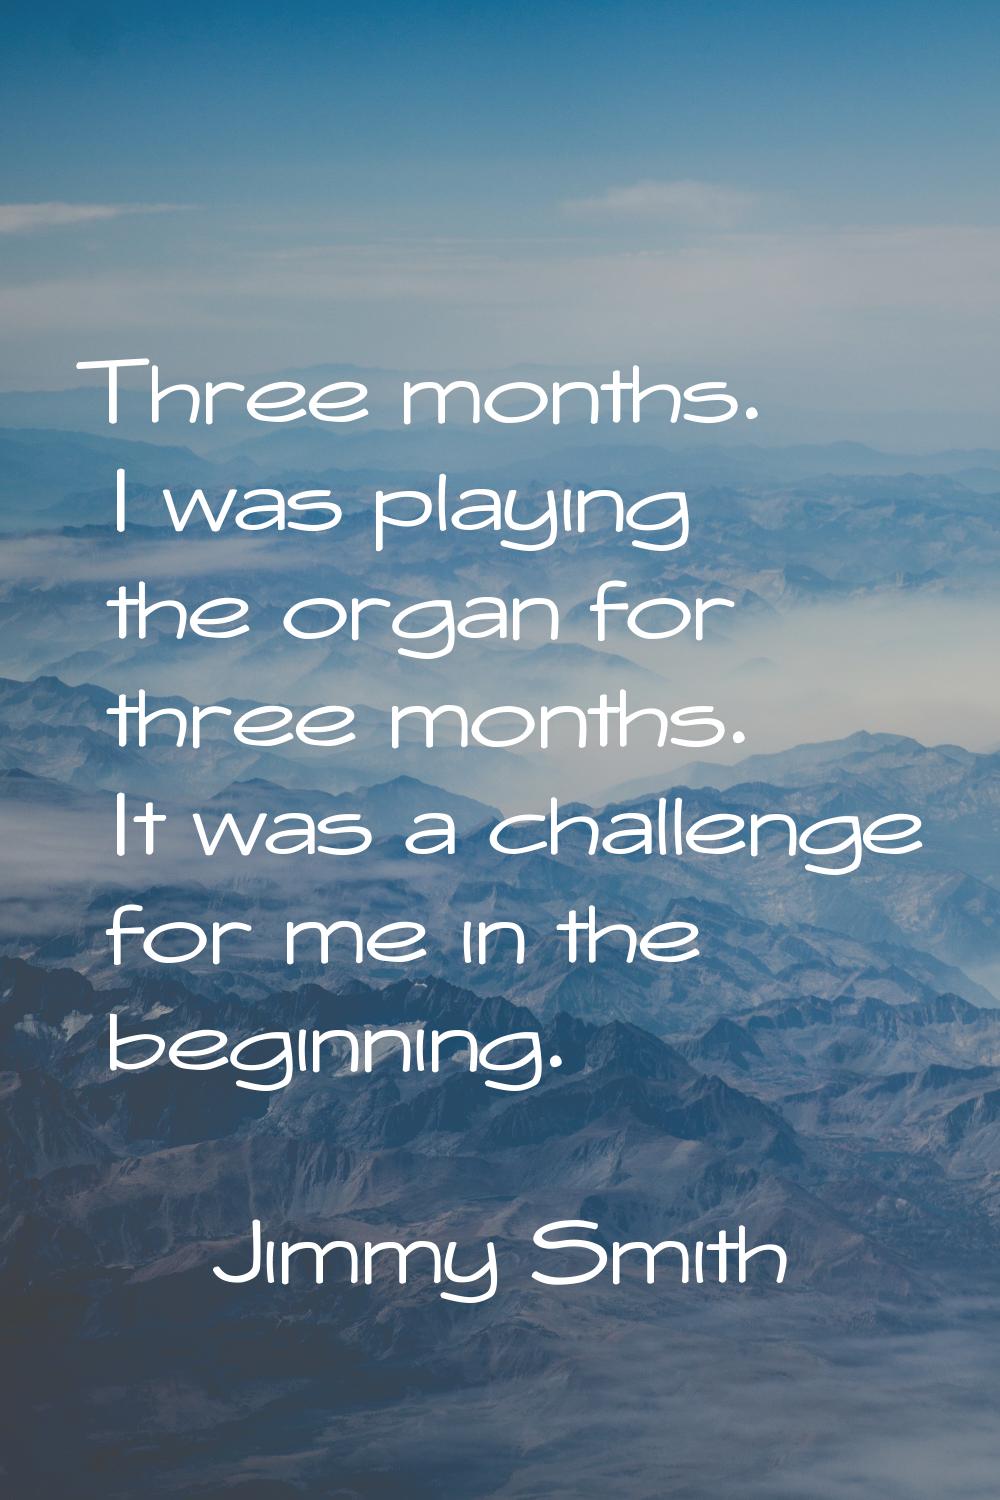 Three months. I was playing the organ for three months. It was a challenge for me in the beginning.